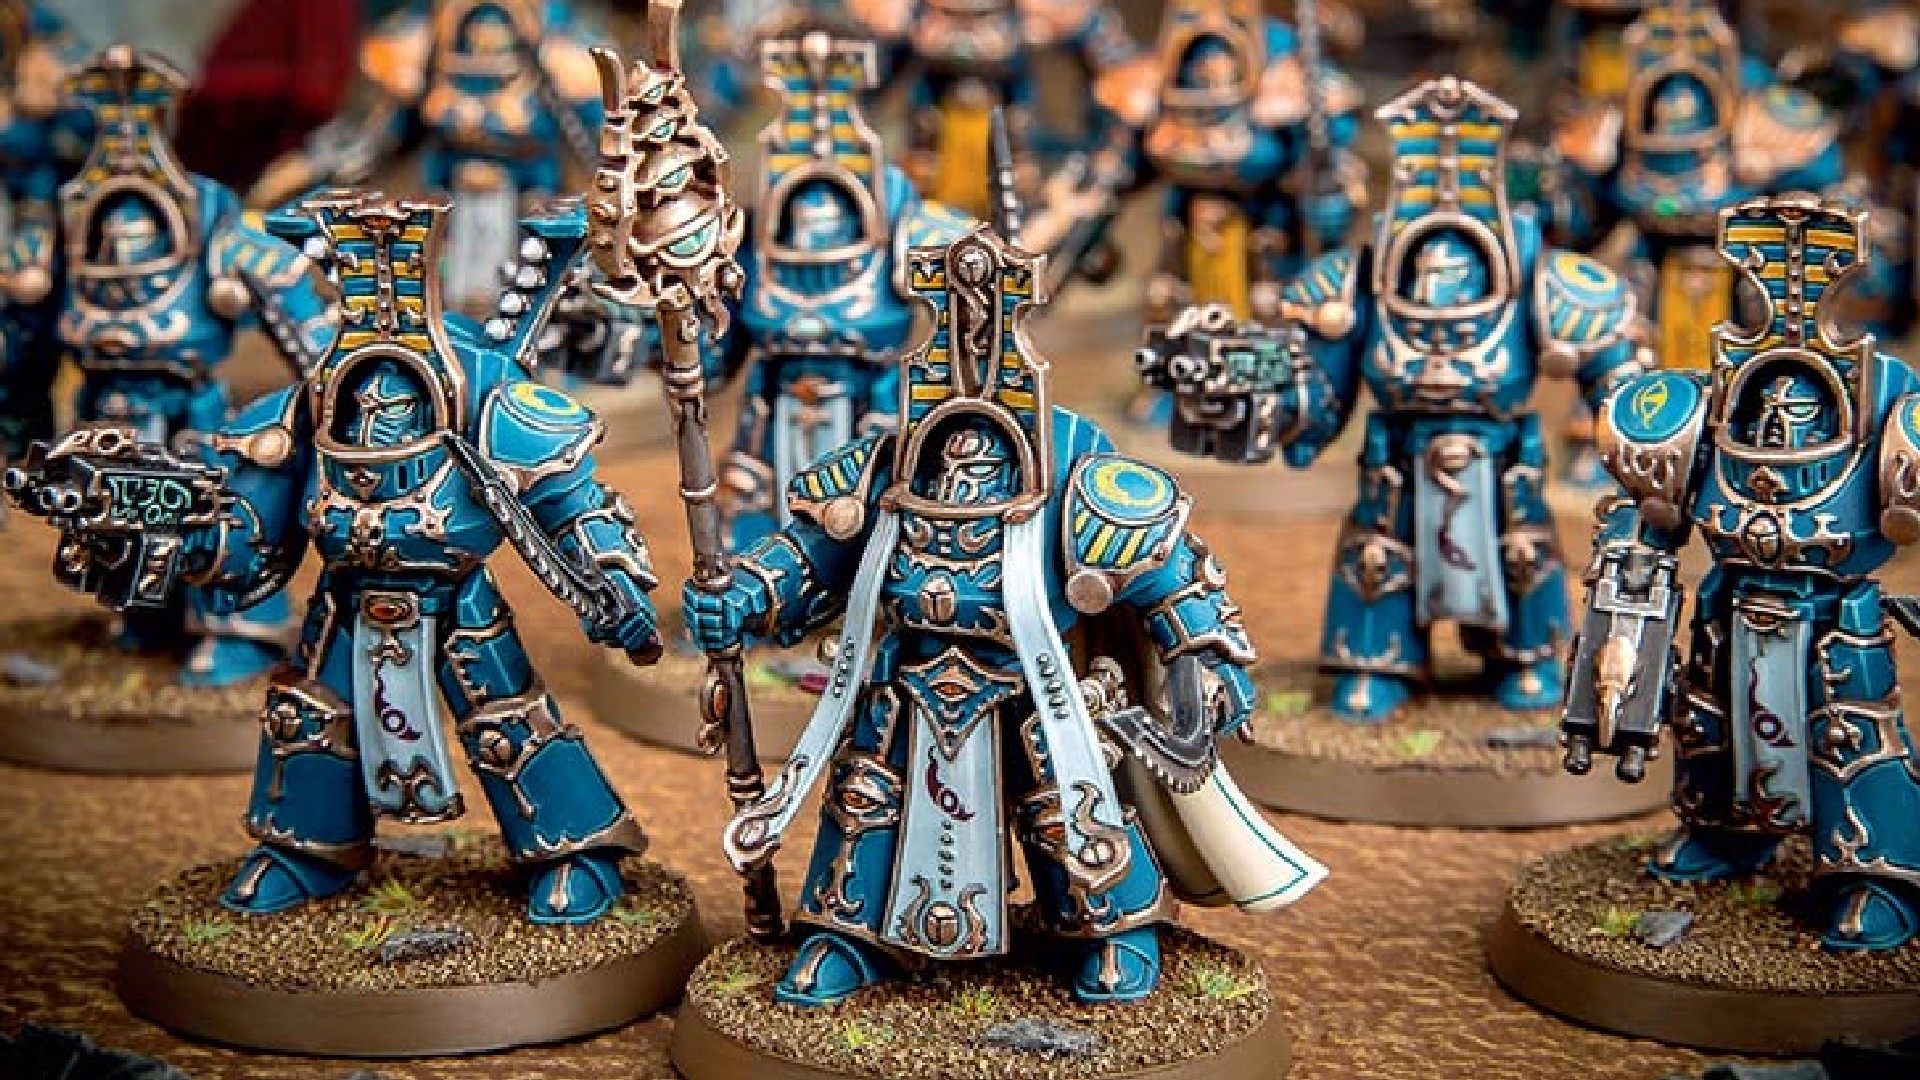 Start Competing: Thousand Sons Tactics